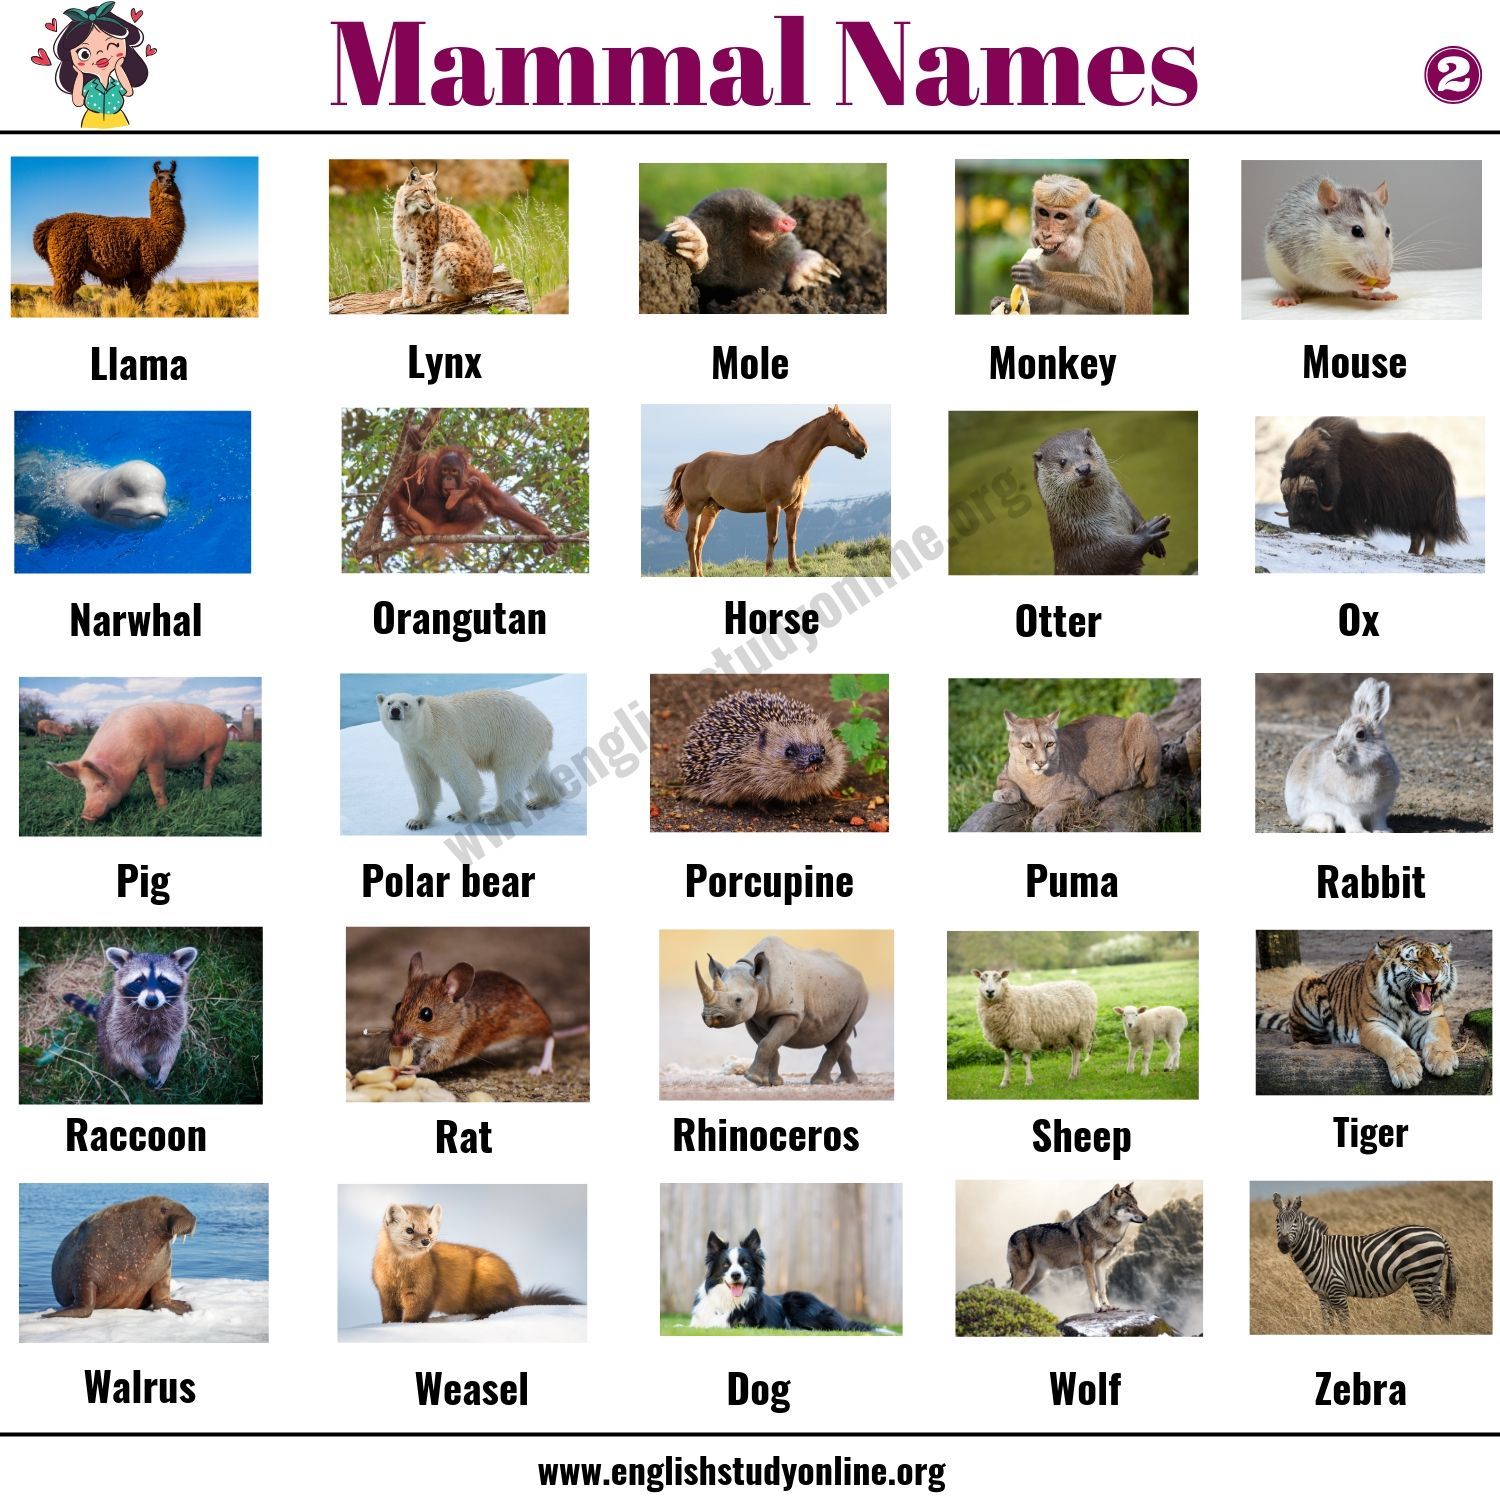 What is an example of a mammal?